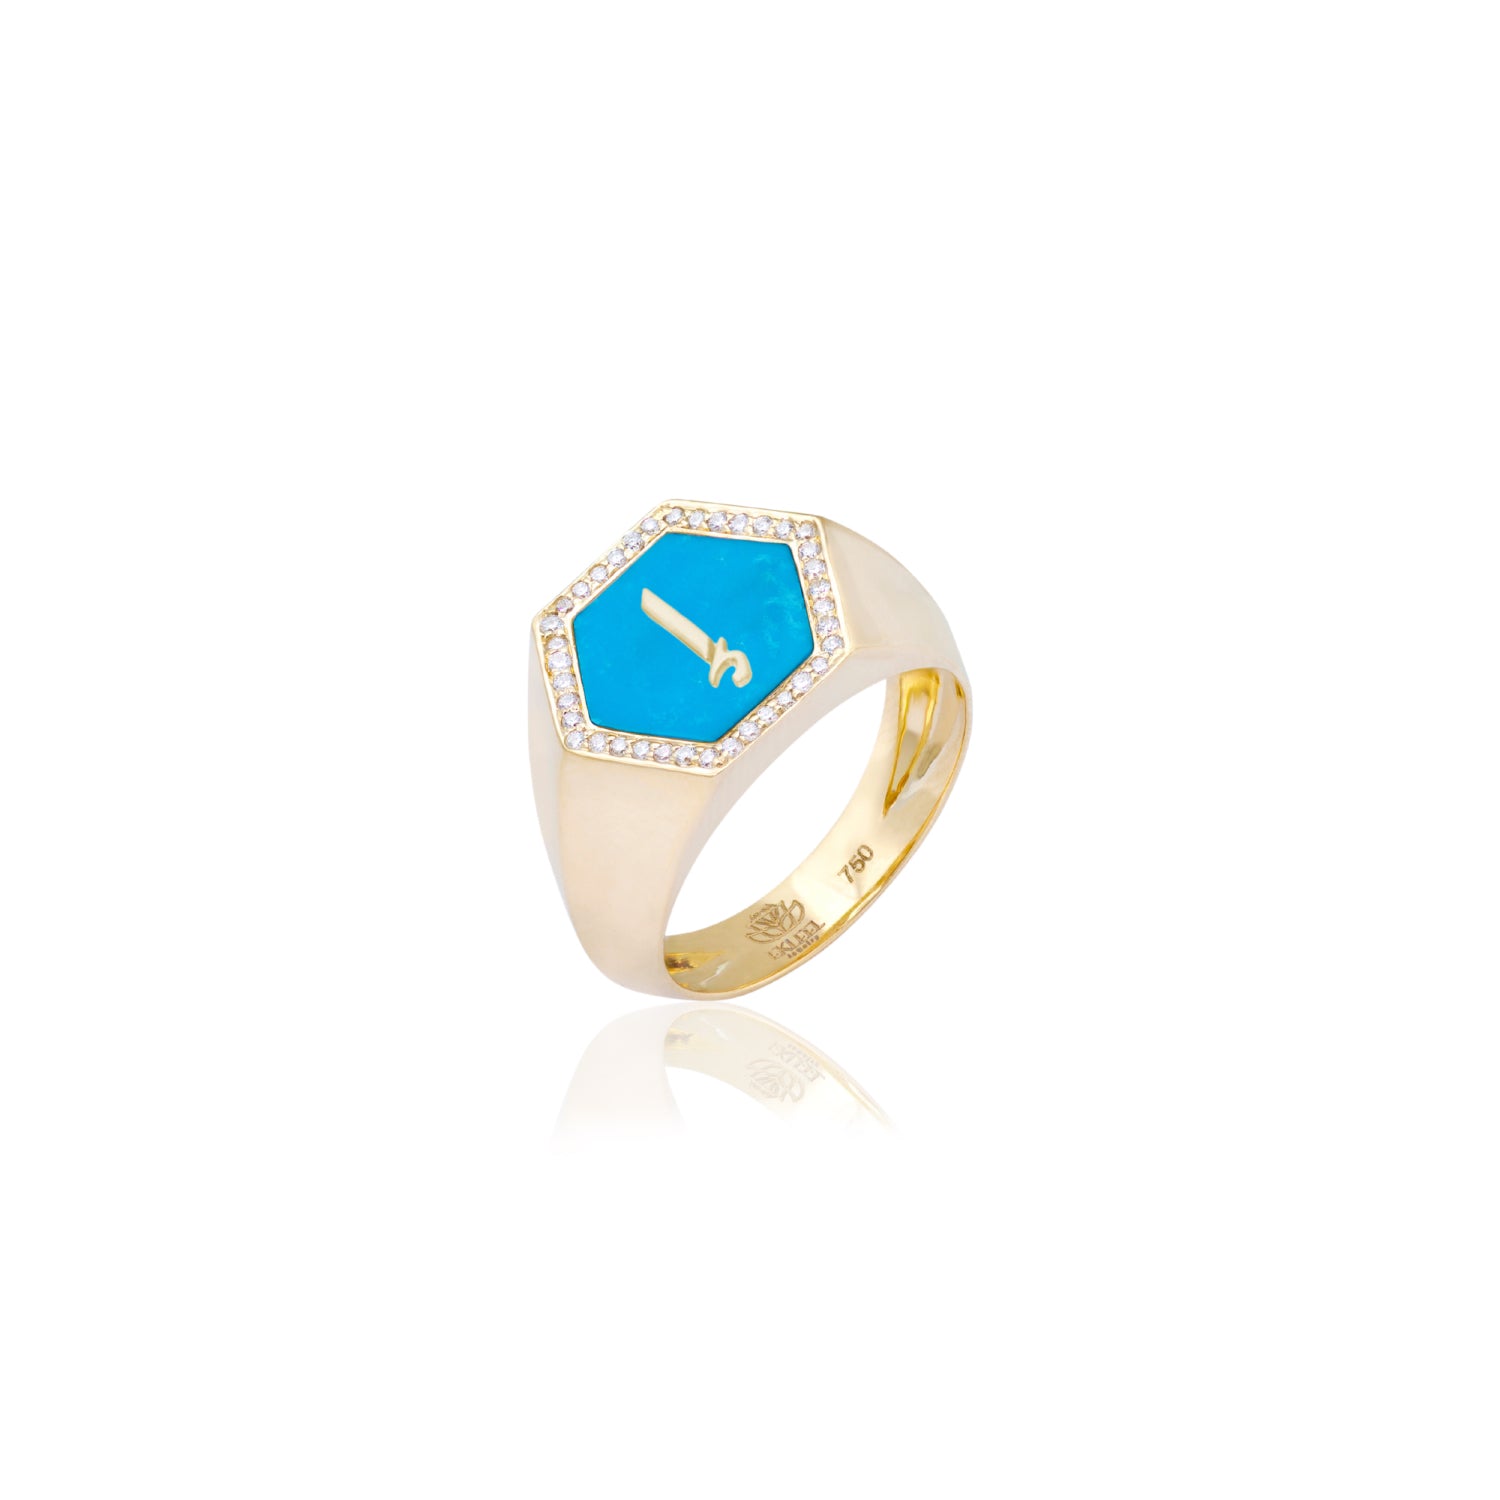 Qamoos 2.0 Letter إ Turquoise and Diamond Signet Ring in Yellow Gold